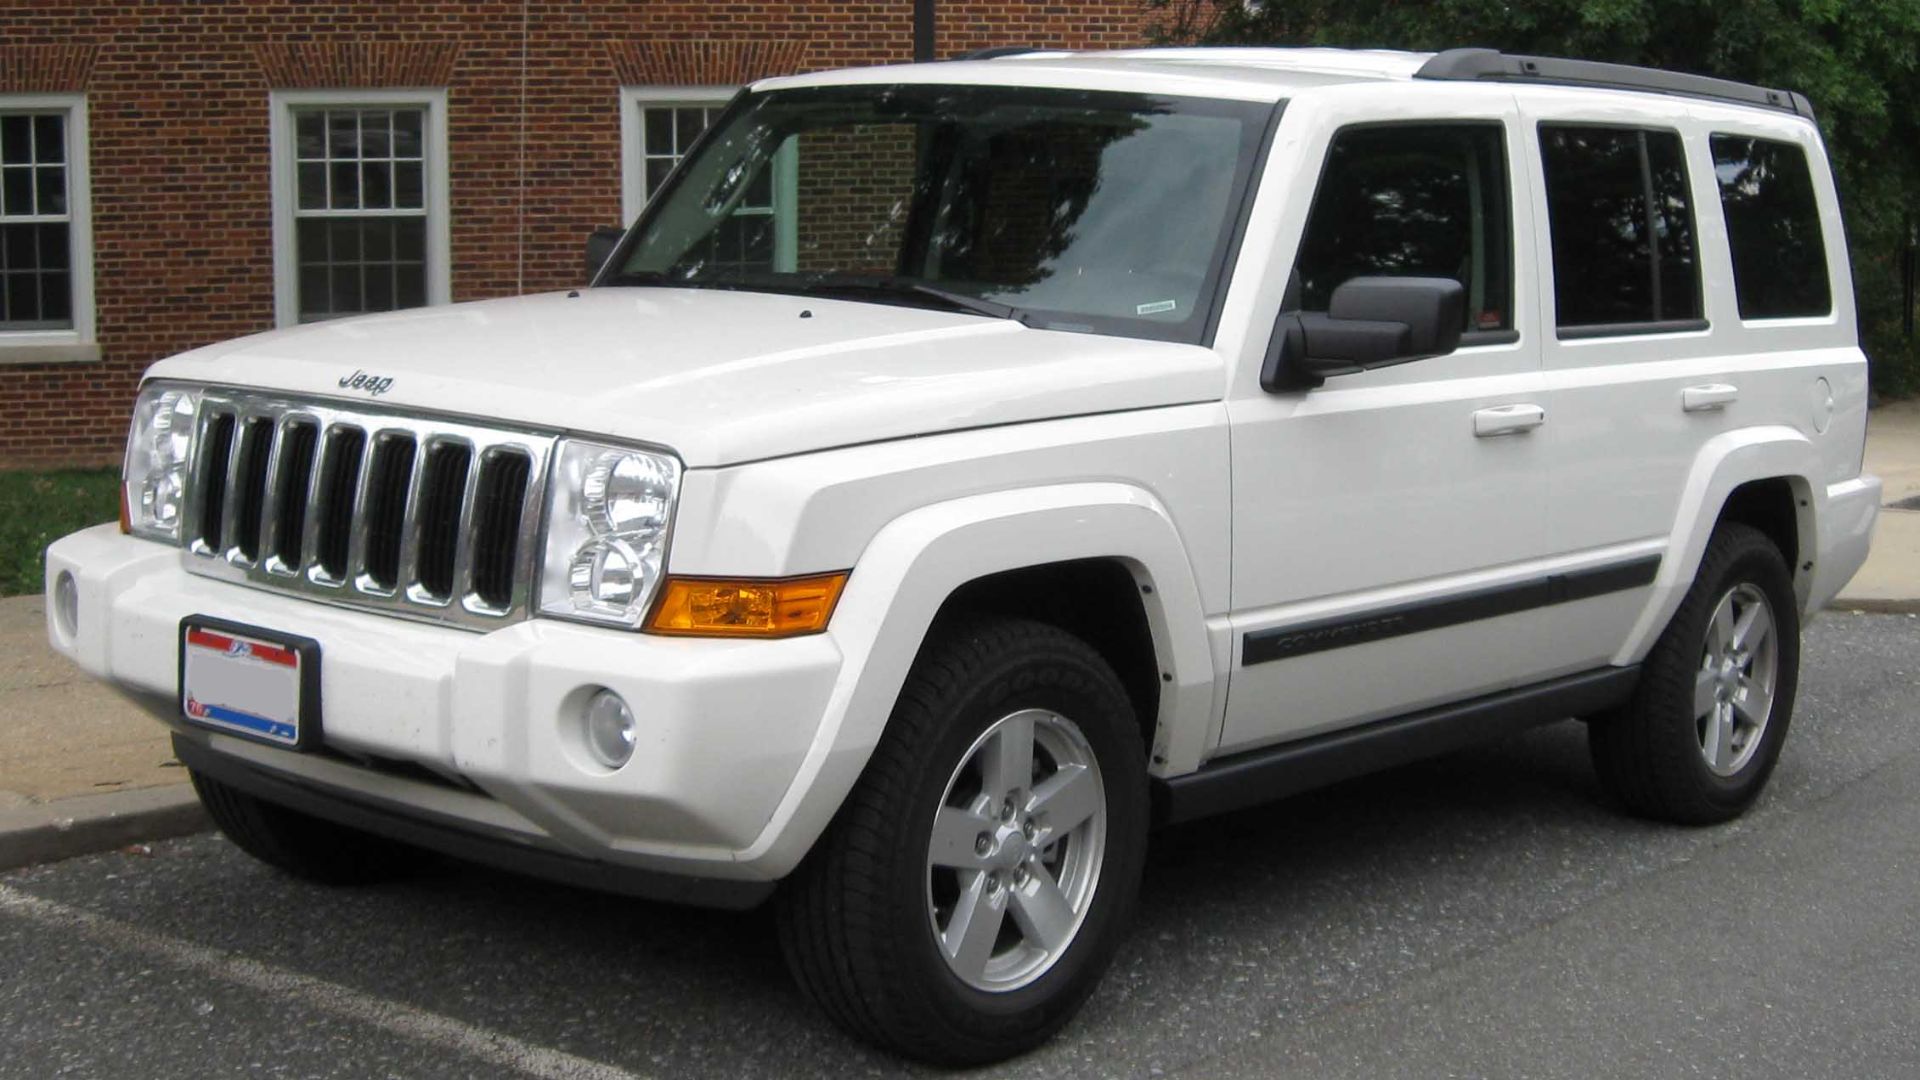 a white jeep parked in front of a brick building.